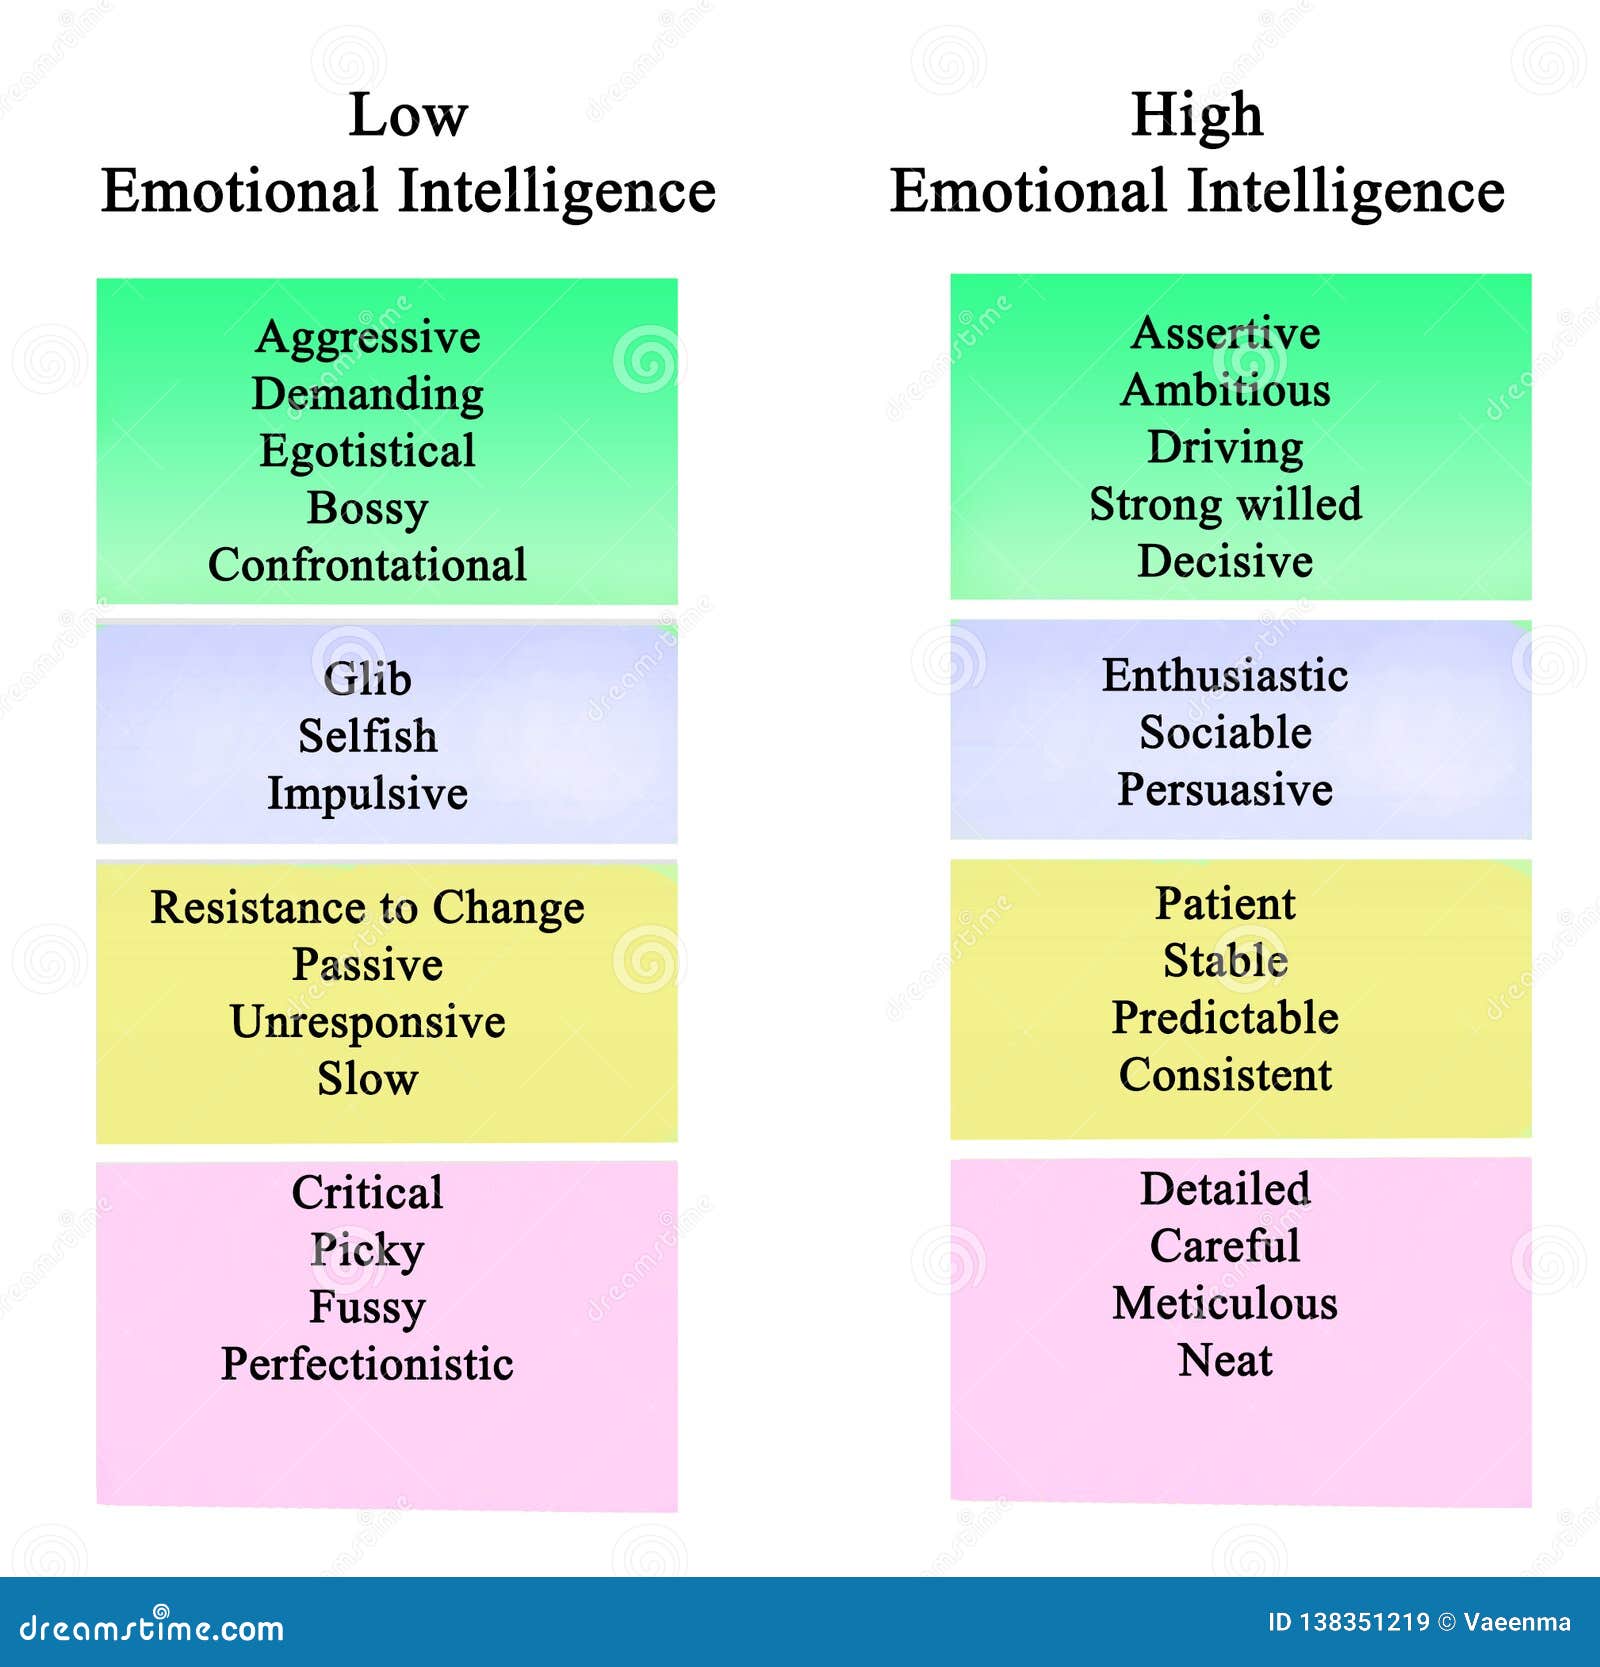 What causes low emotional intelligence